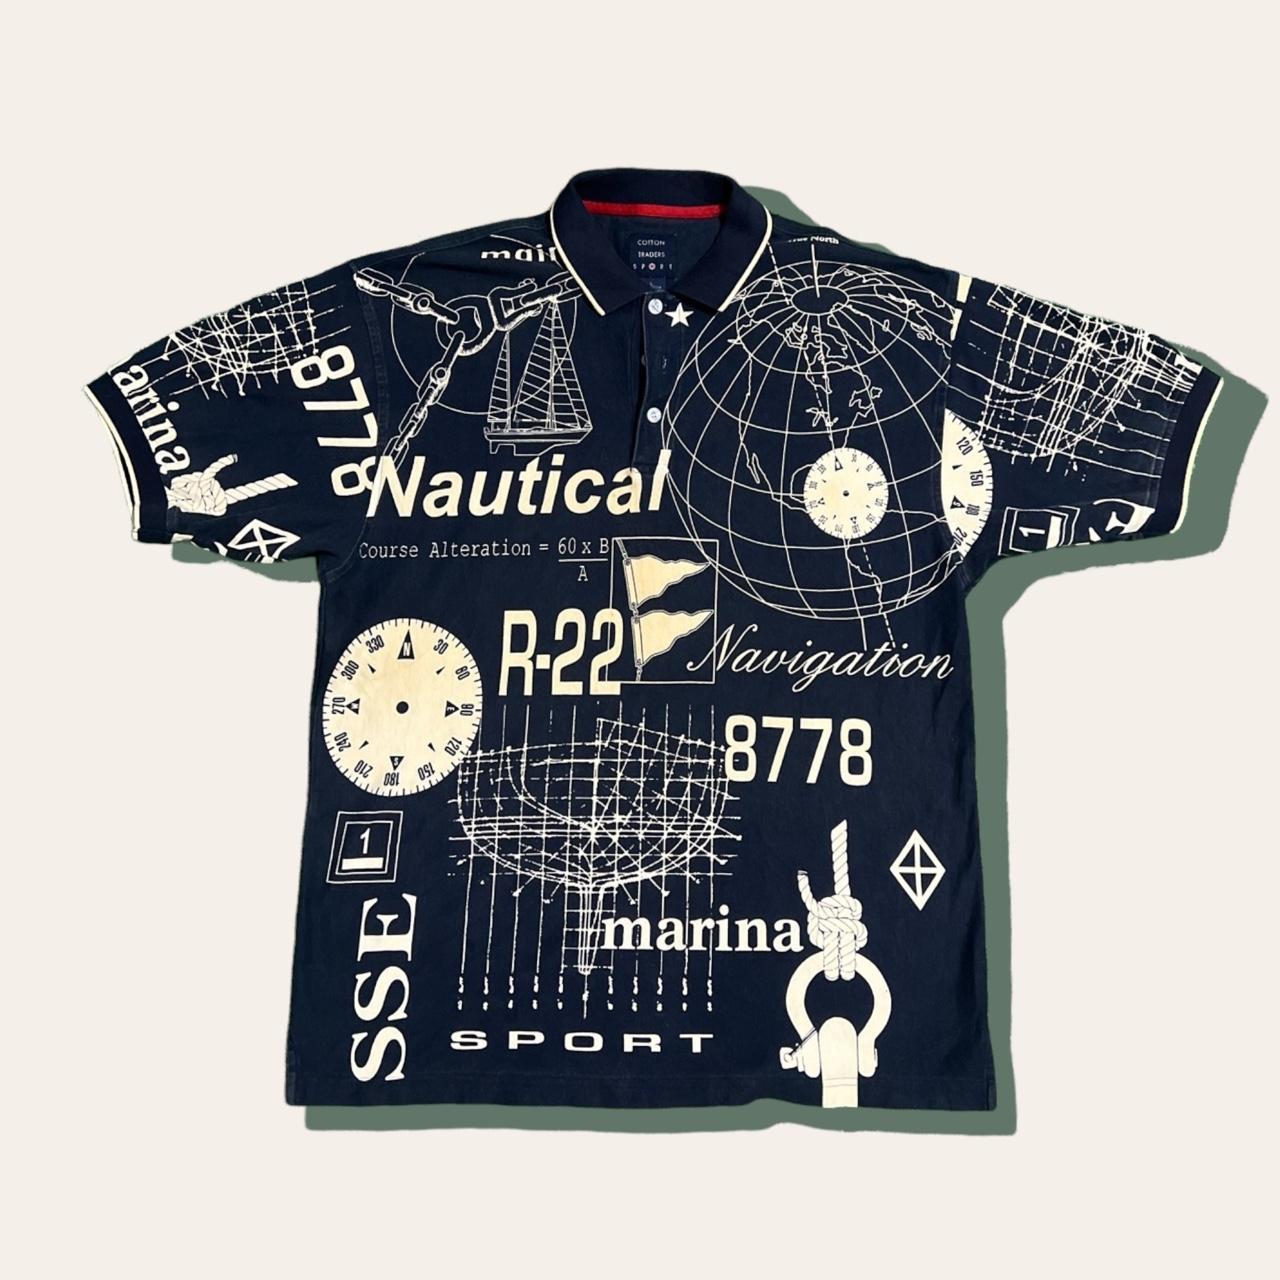 Product Image 1 - Fire Y2K nautical cotton traders